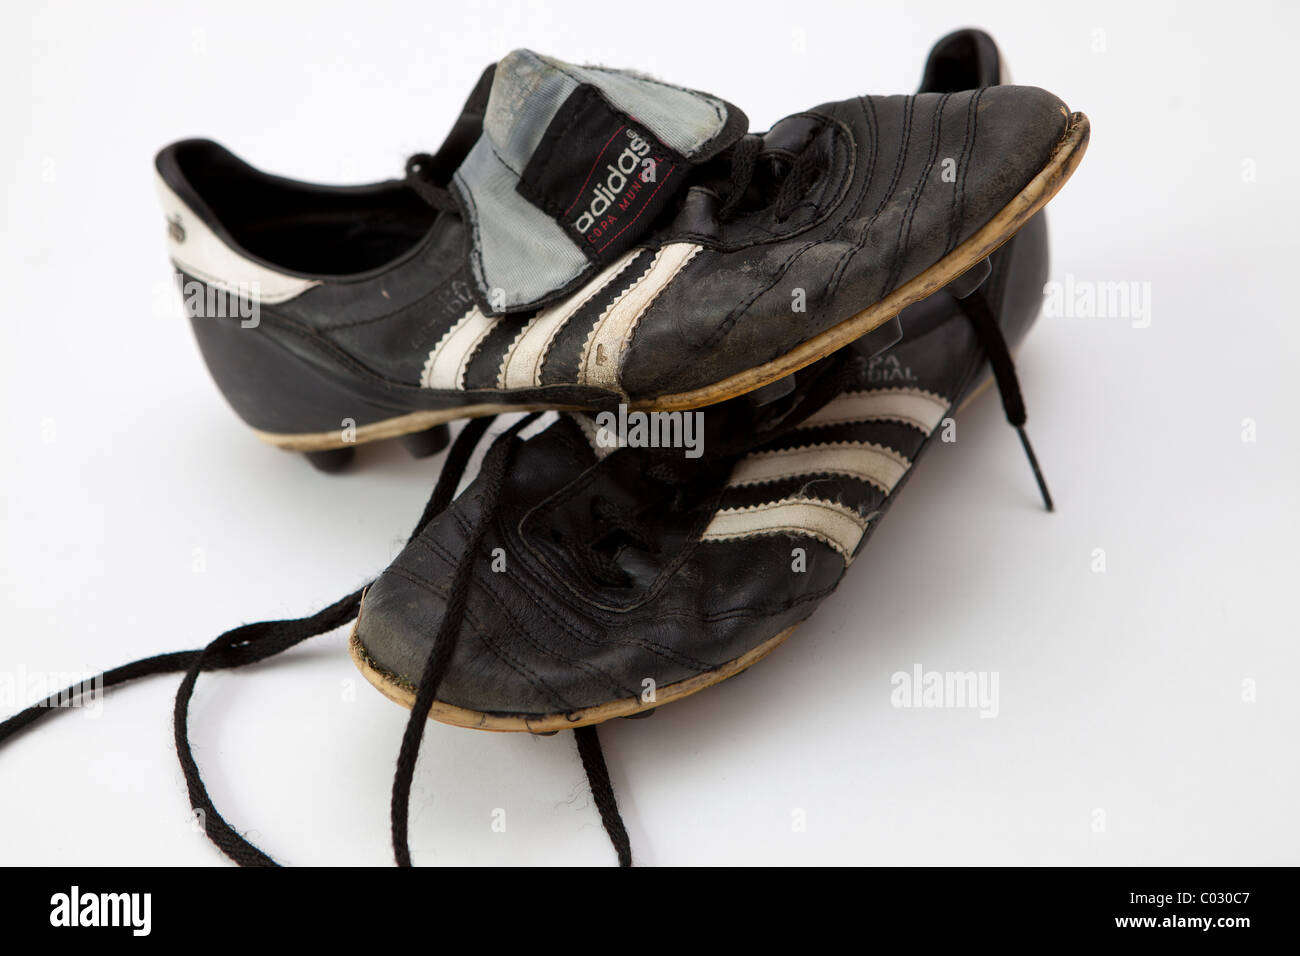 adidas boots old